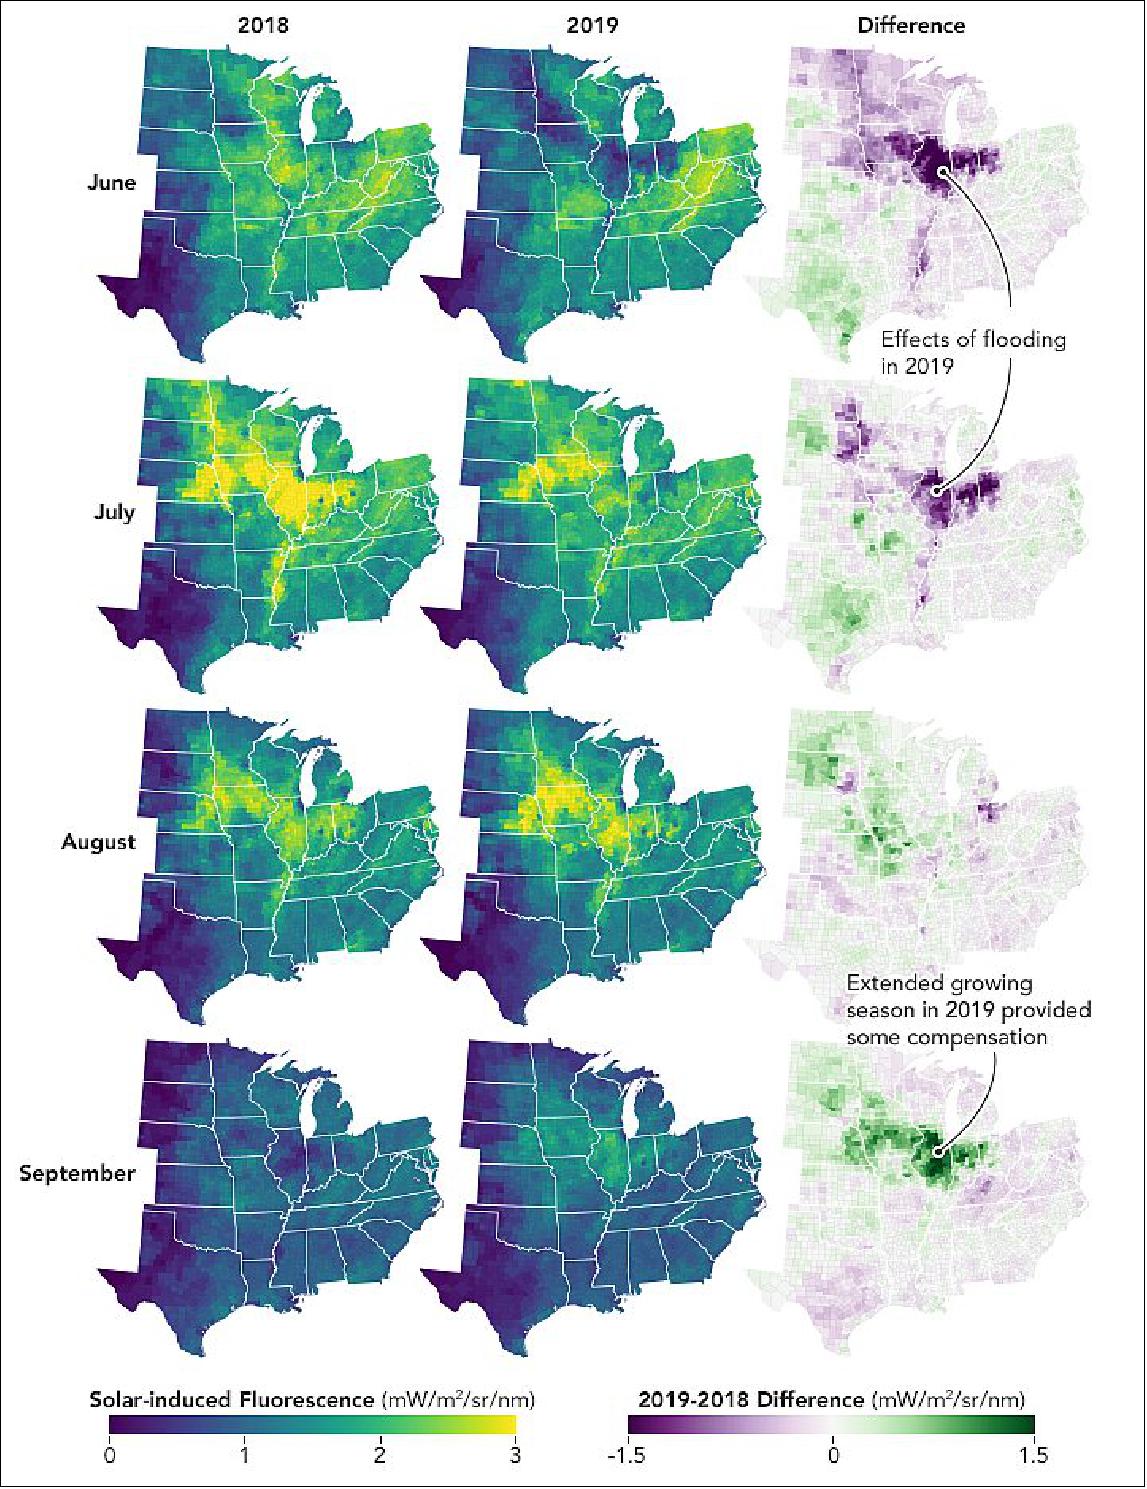 Figure 13: As scientists detect plant fluorescence in better detail, they inch closer to helping farmers respond to extreme weather and close in on understanding how carbon cycles through ecosystems. The maps above show how the solar induced fluorescence signal evolved across the Midwest during a typical growing season (2018) and during the record precipitation and flood conditions of 2019. The third column shows the difference between the two years. Notice that fluorescence in 2018 peaked strongly in July and then declined, which is the typical progression of productivity across Midwest croplands (image credit: NASA Earth Observatory, images by Joshua Stevens, using data courtesy of Yin, Y. et al. (2020). Story by Kathryn Hansen)